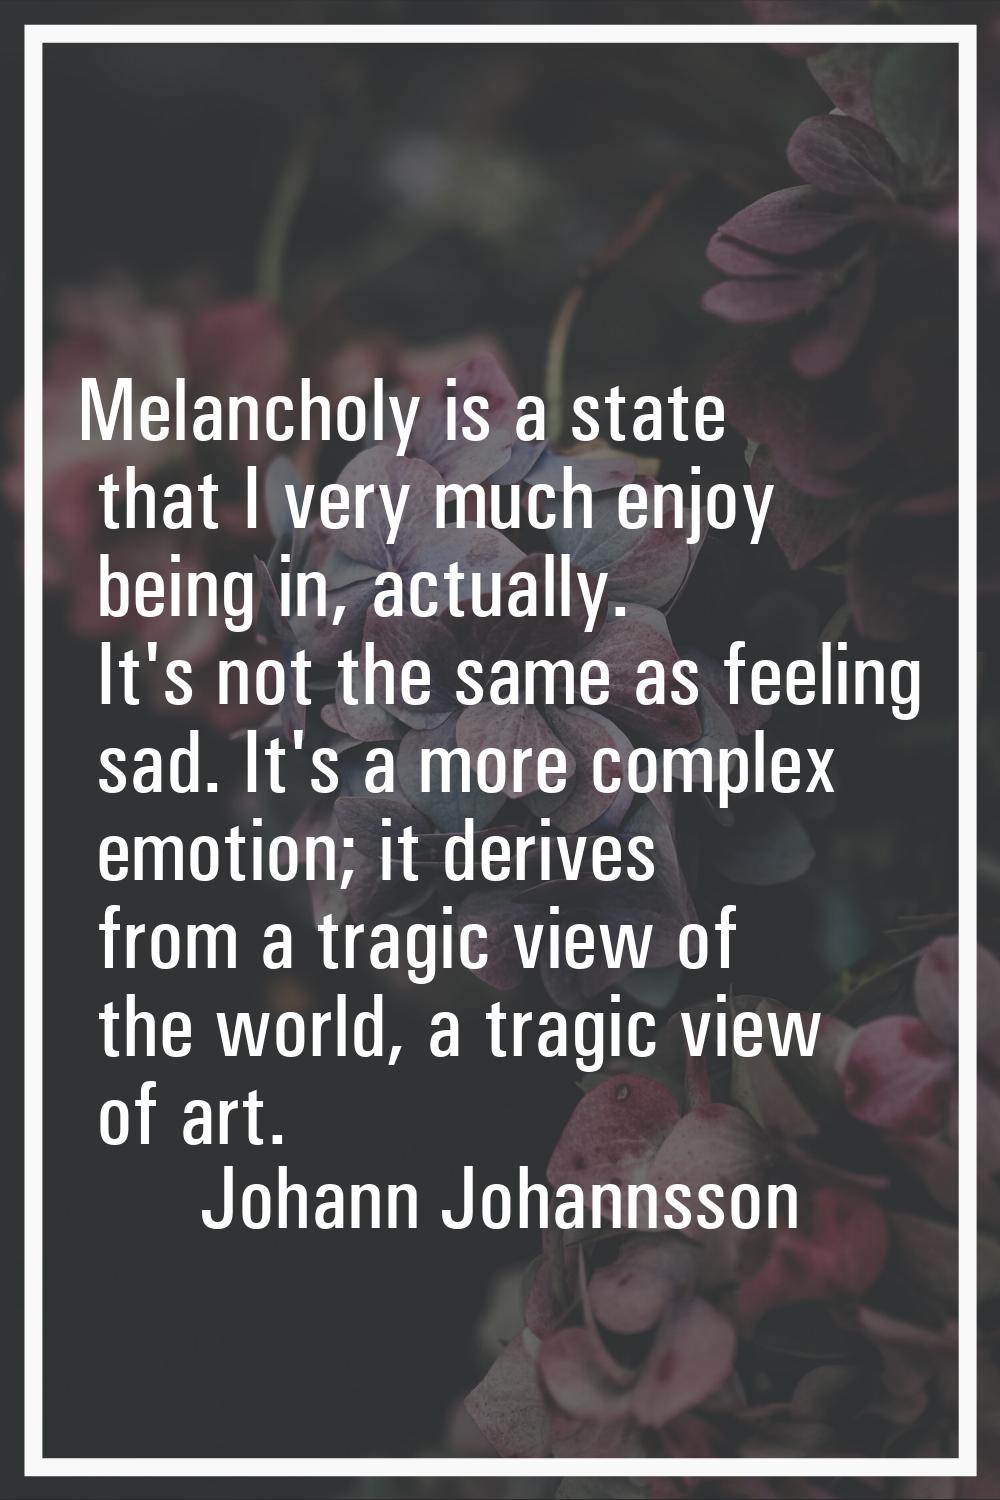 Melancholy is a state that I very much enjoy being in, actually. It's not the same as feeling sad. 